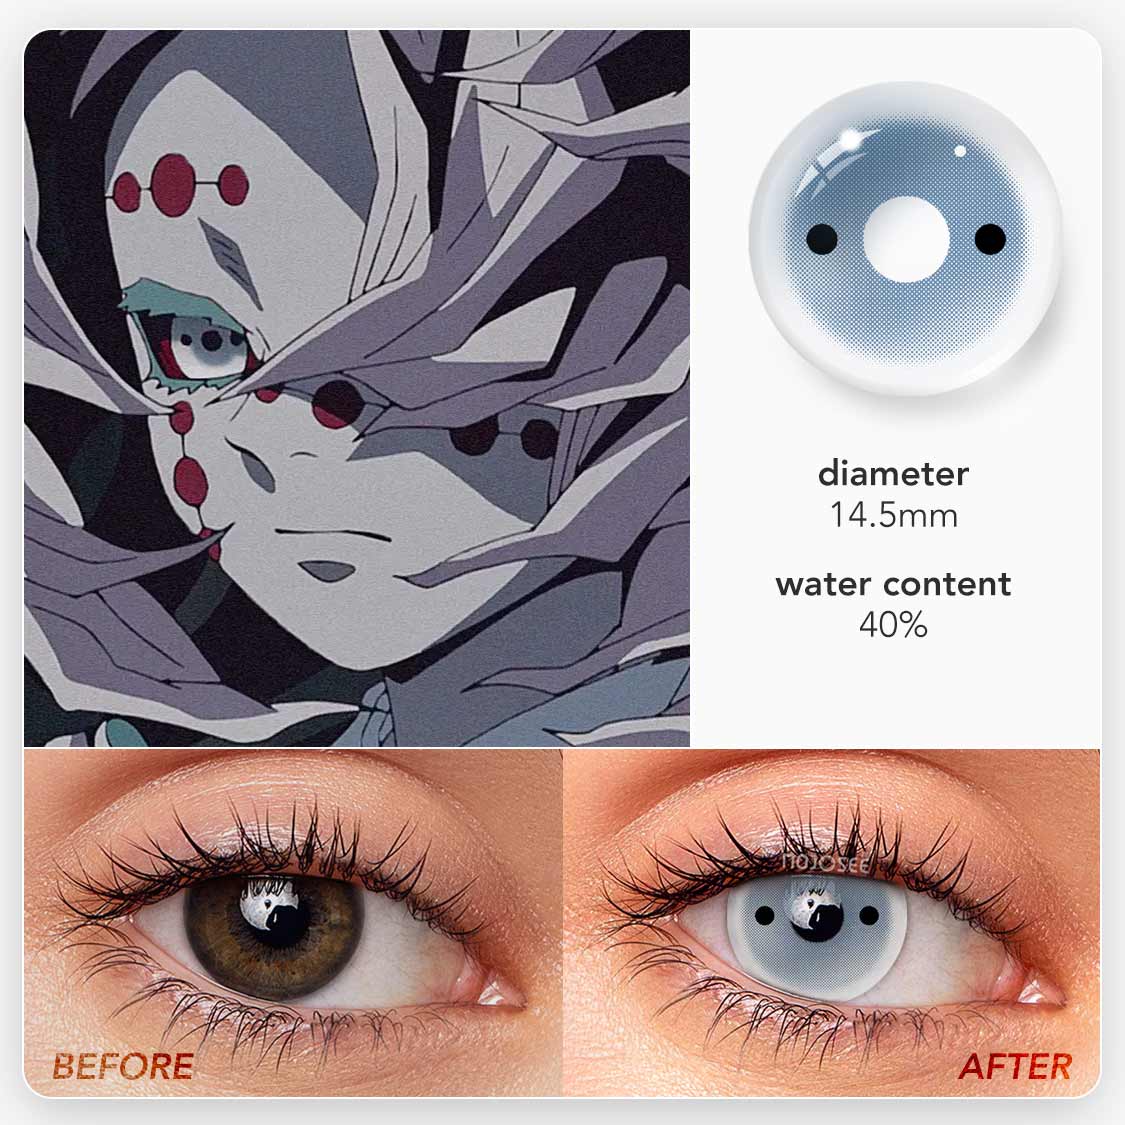 anime eye contacts before and after